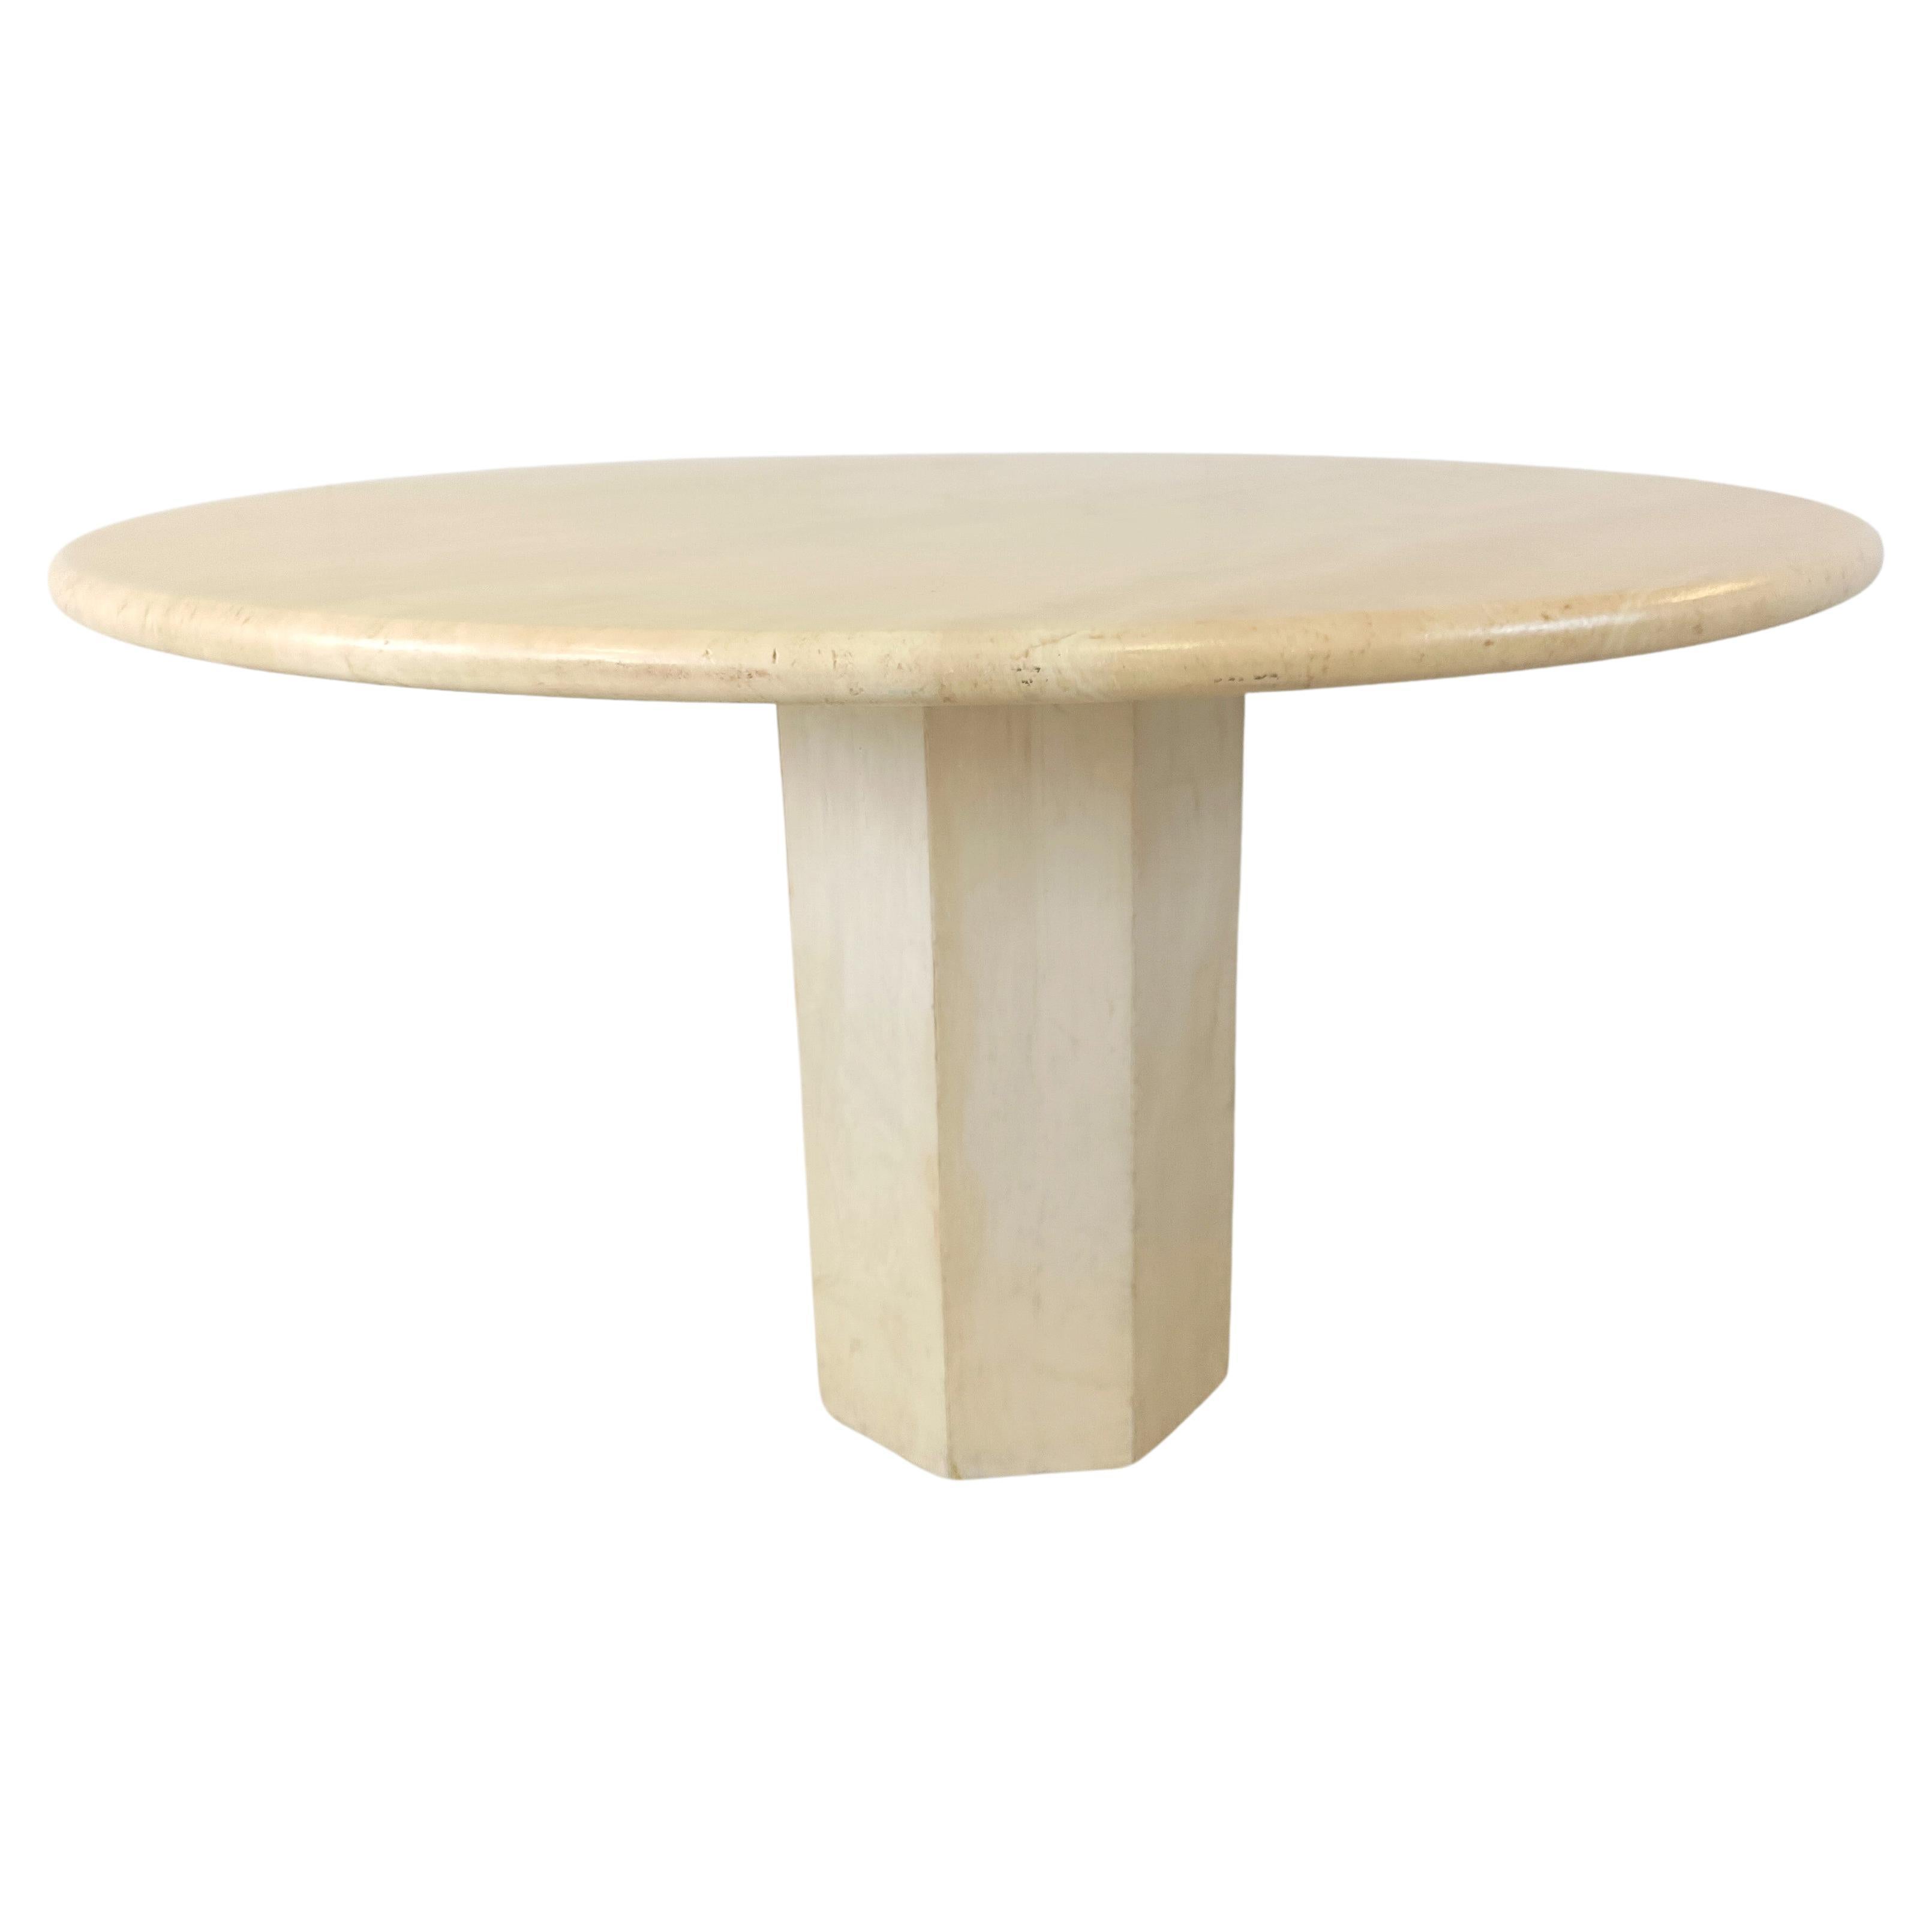 Round italian travertine dining table 1970s For Sale